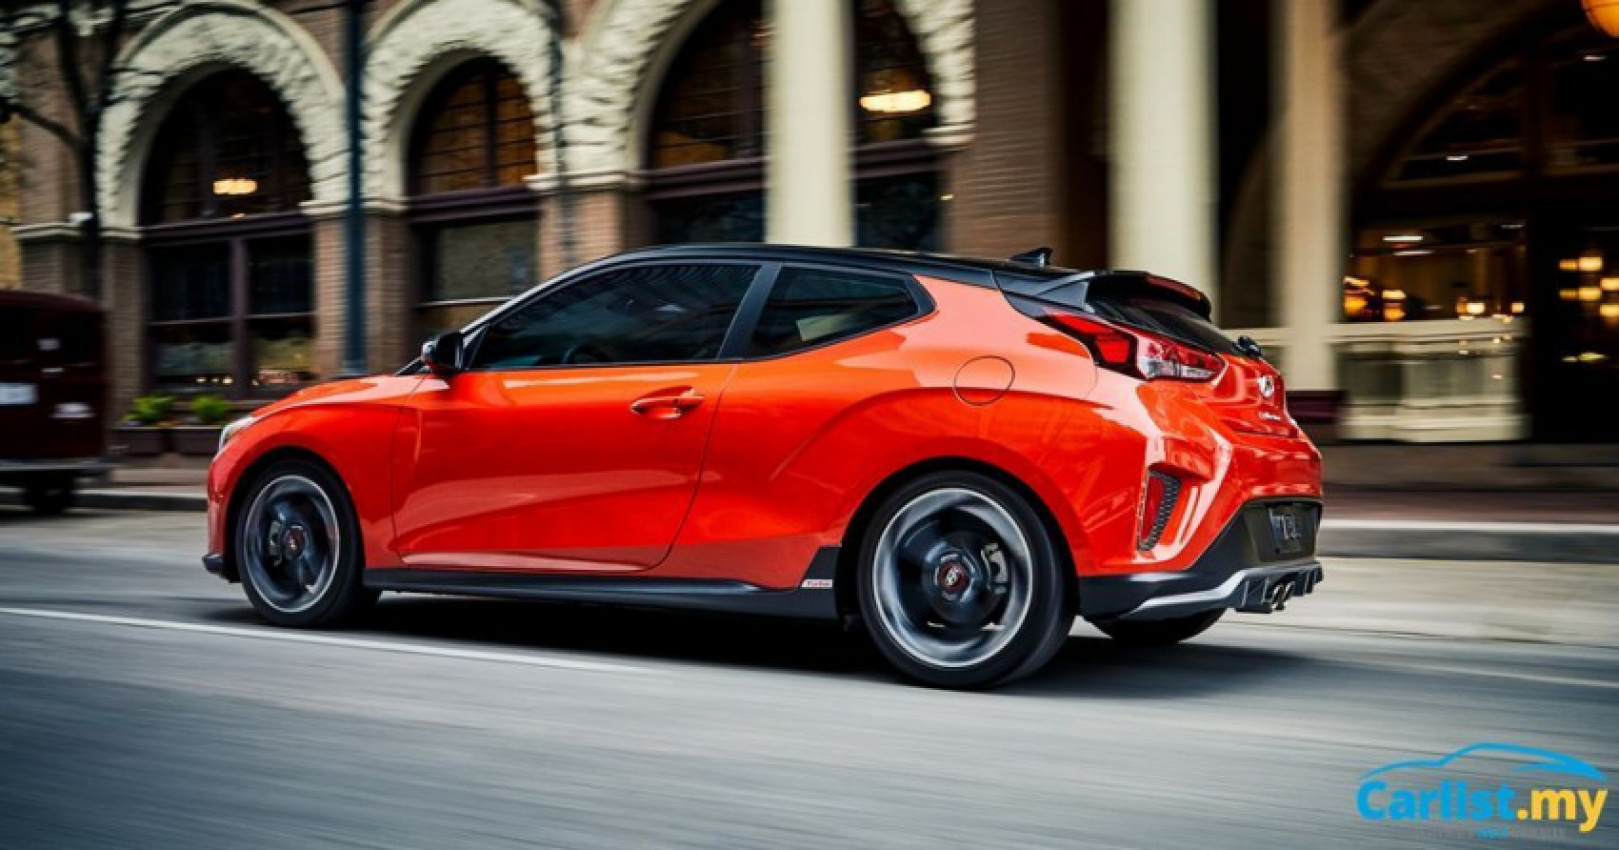 autos, cars, hyundai, auto news, hyundai veloster, veloster, 2019 hyundai veloster all set for hollywood debut in marvel’s ant-man and the wasp